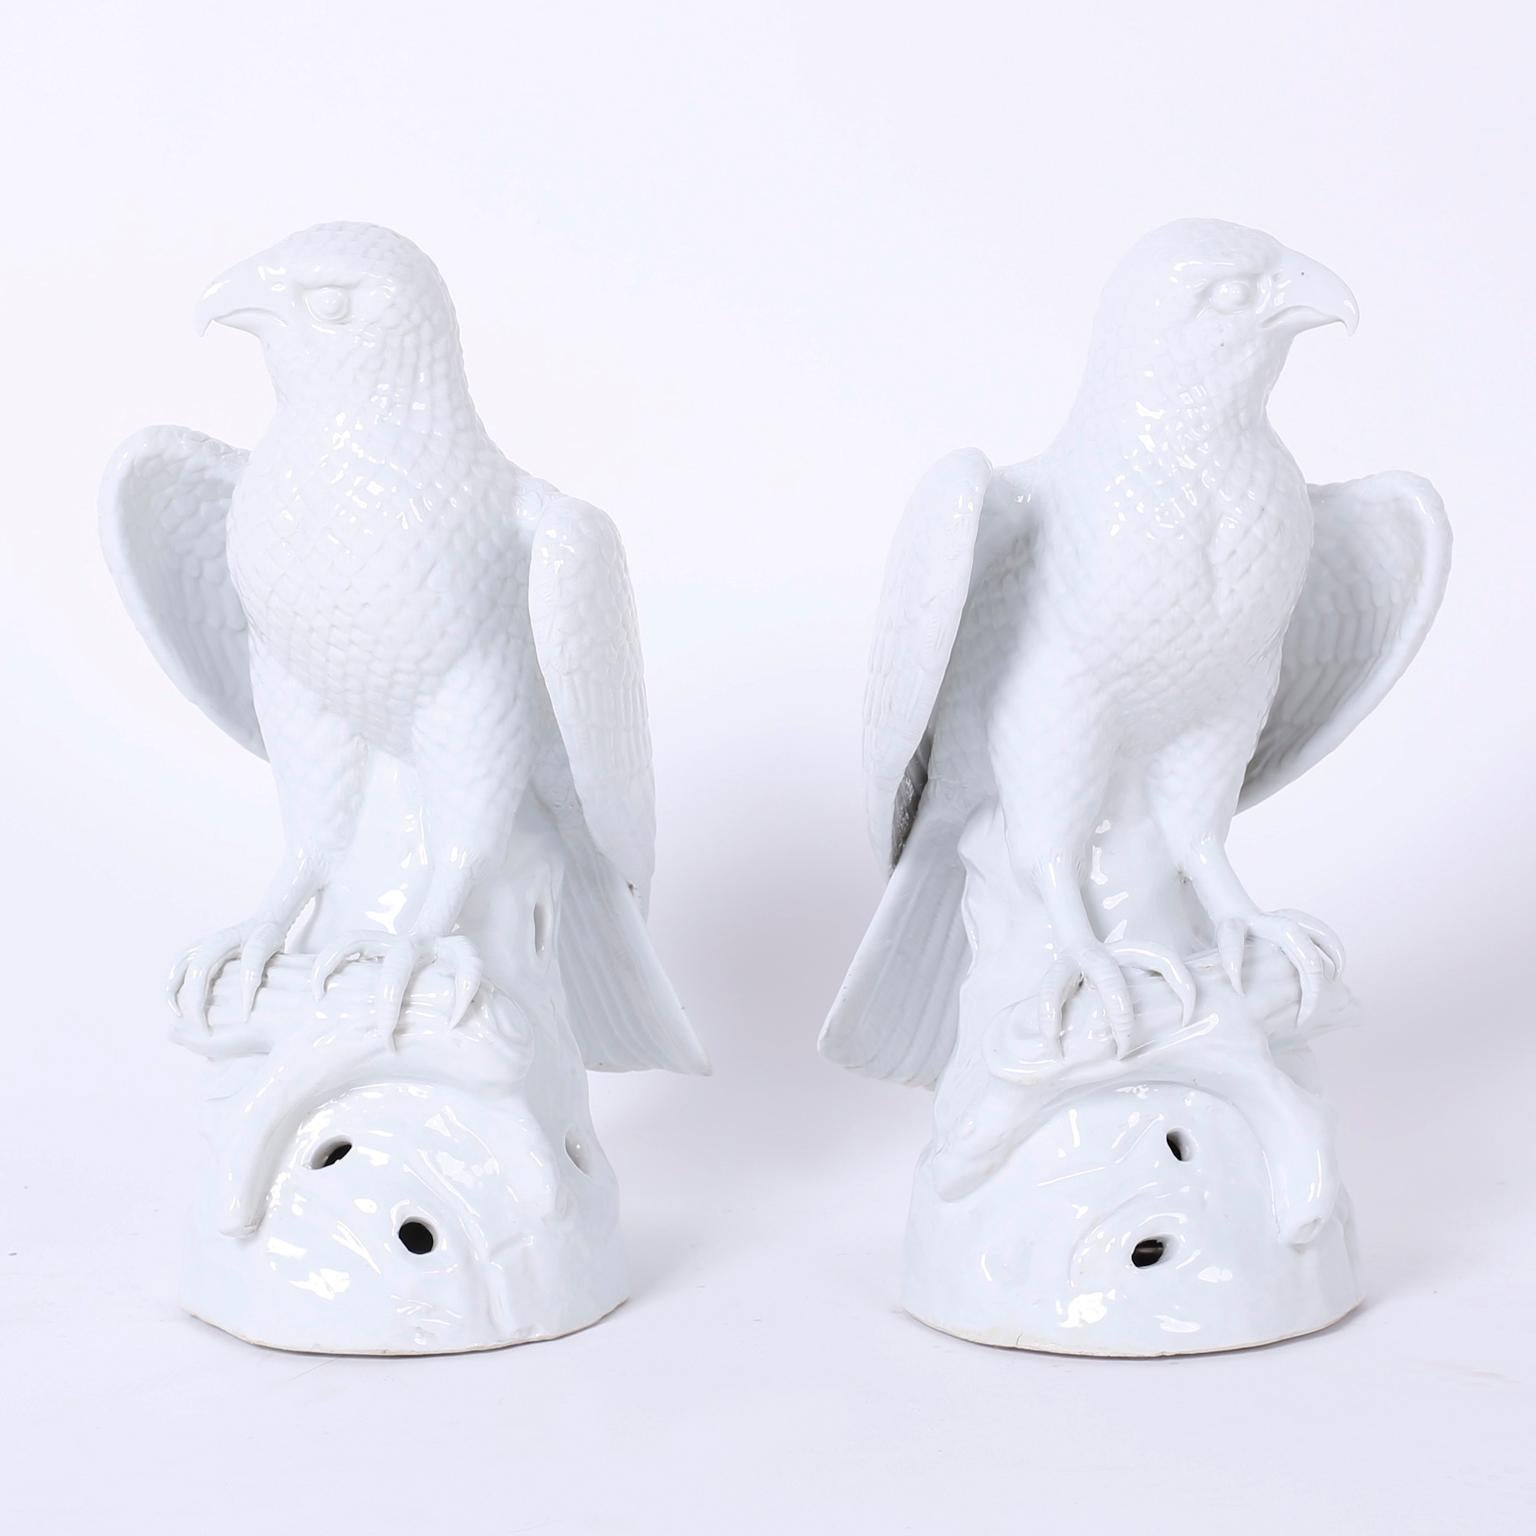 Pair of vintage porcelain birds of prey with a stark white glaze. These formidable eagles or hawks are portrayed in an alert posture perched on a branch.